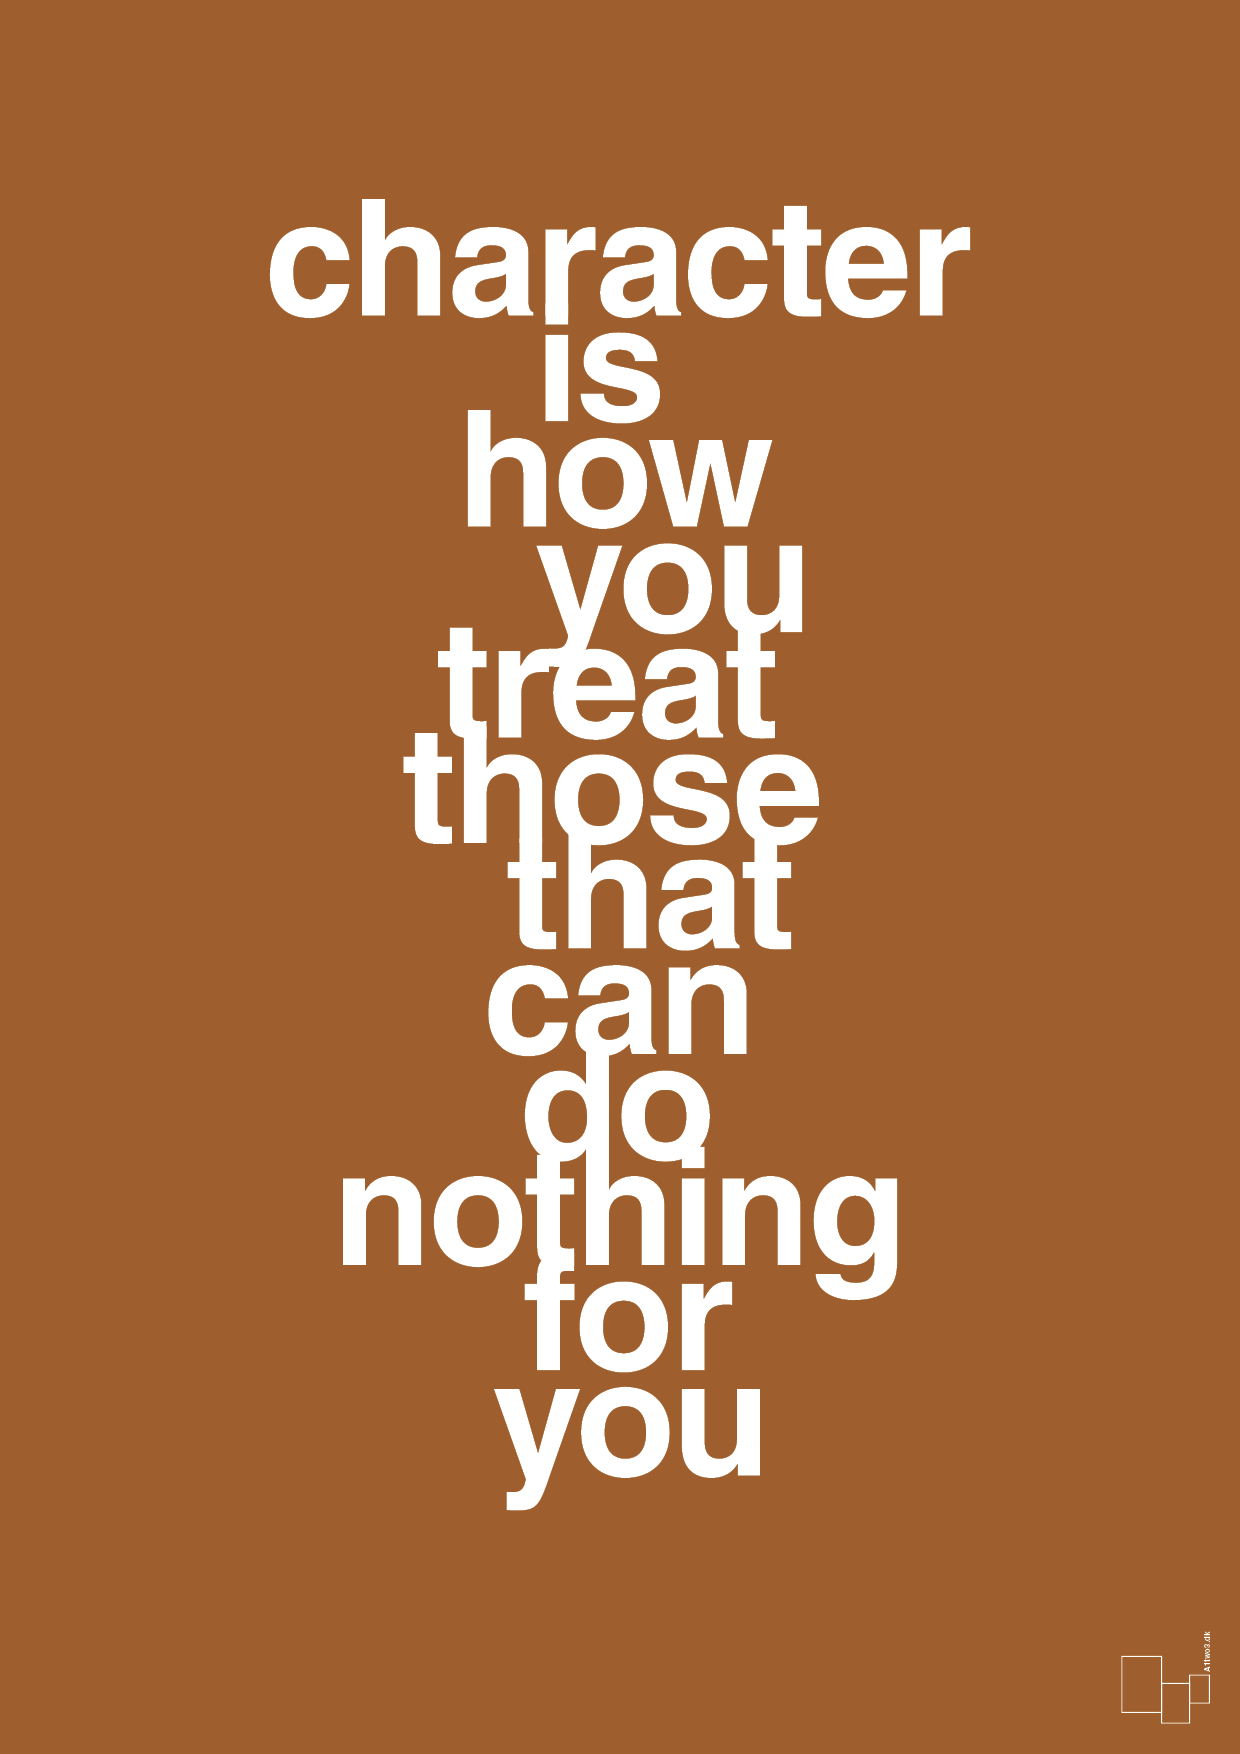 plakat: character is how you treat those that can do nothing for you